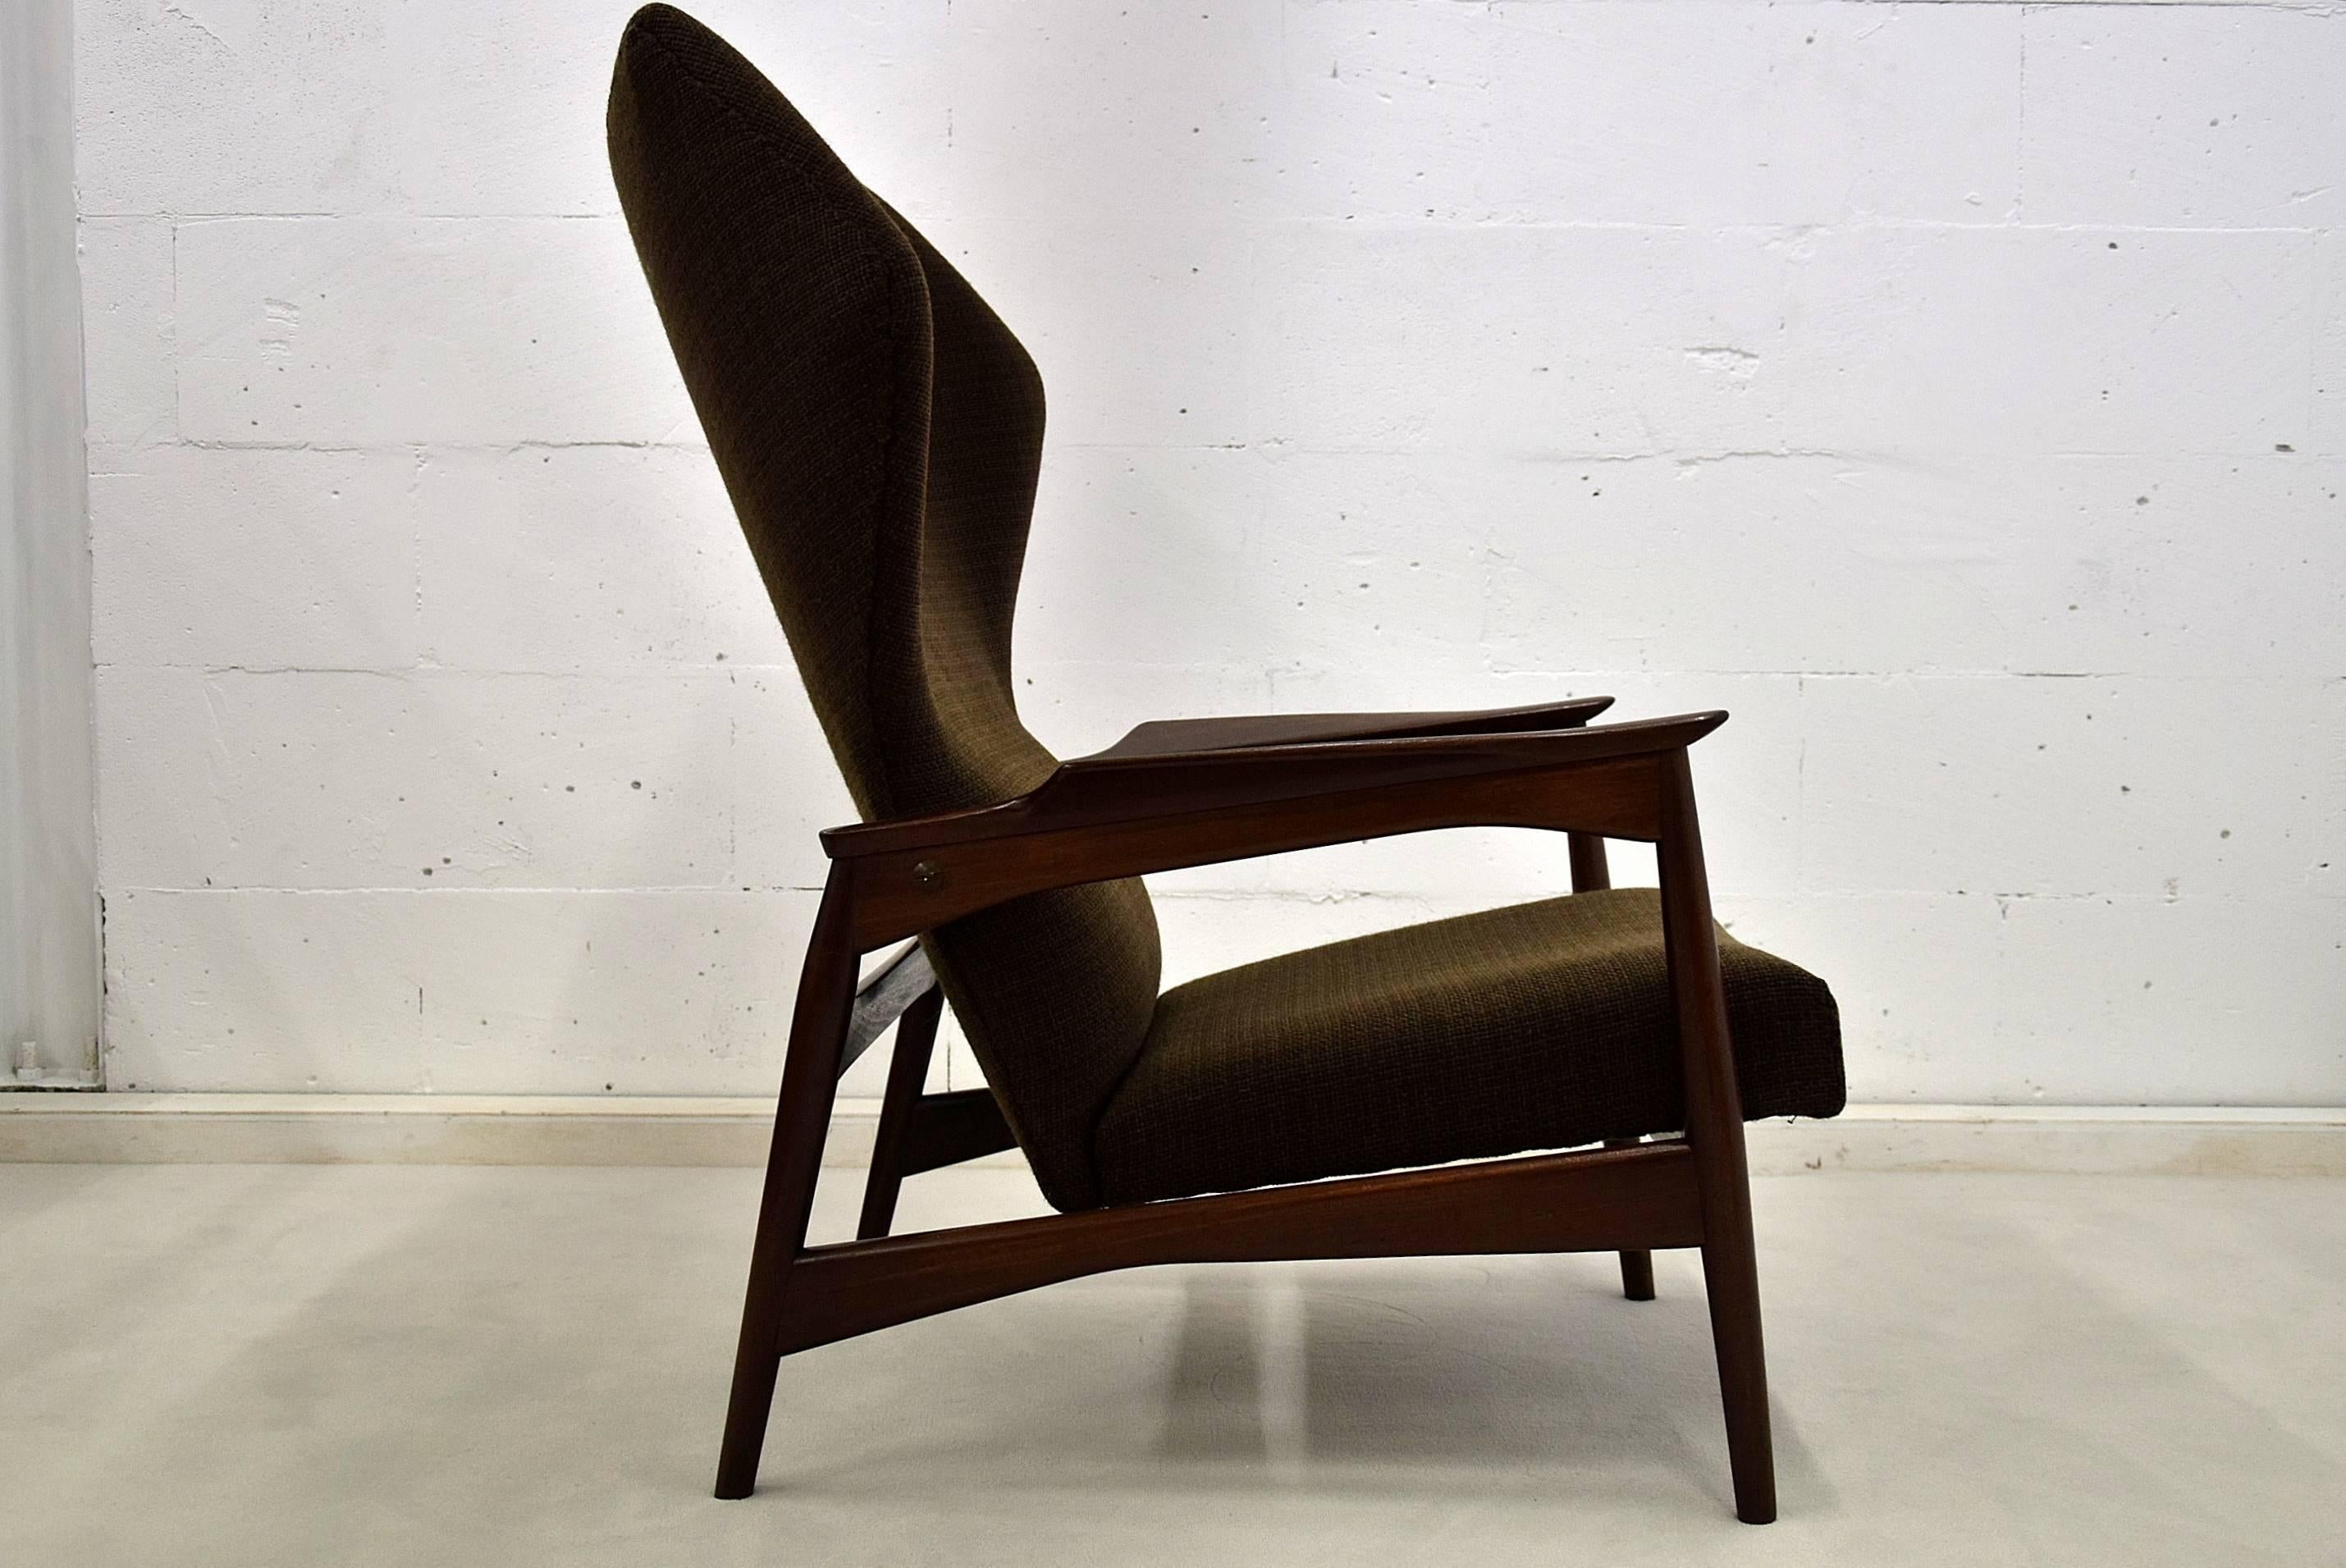 Reclinable Mid-Century wingback lounge chair designed by Ib Kofod-Larsen for Carlo Gahrn in 1954.

The chair has a mahogany frame and the original brown upholstery is in fantastic condition.

Measurements: H.102 x W.75 x D.85 cm. Seating height: